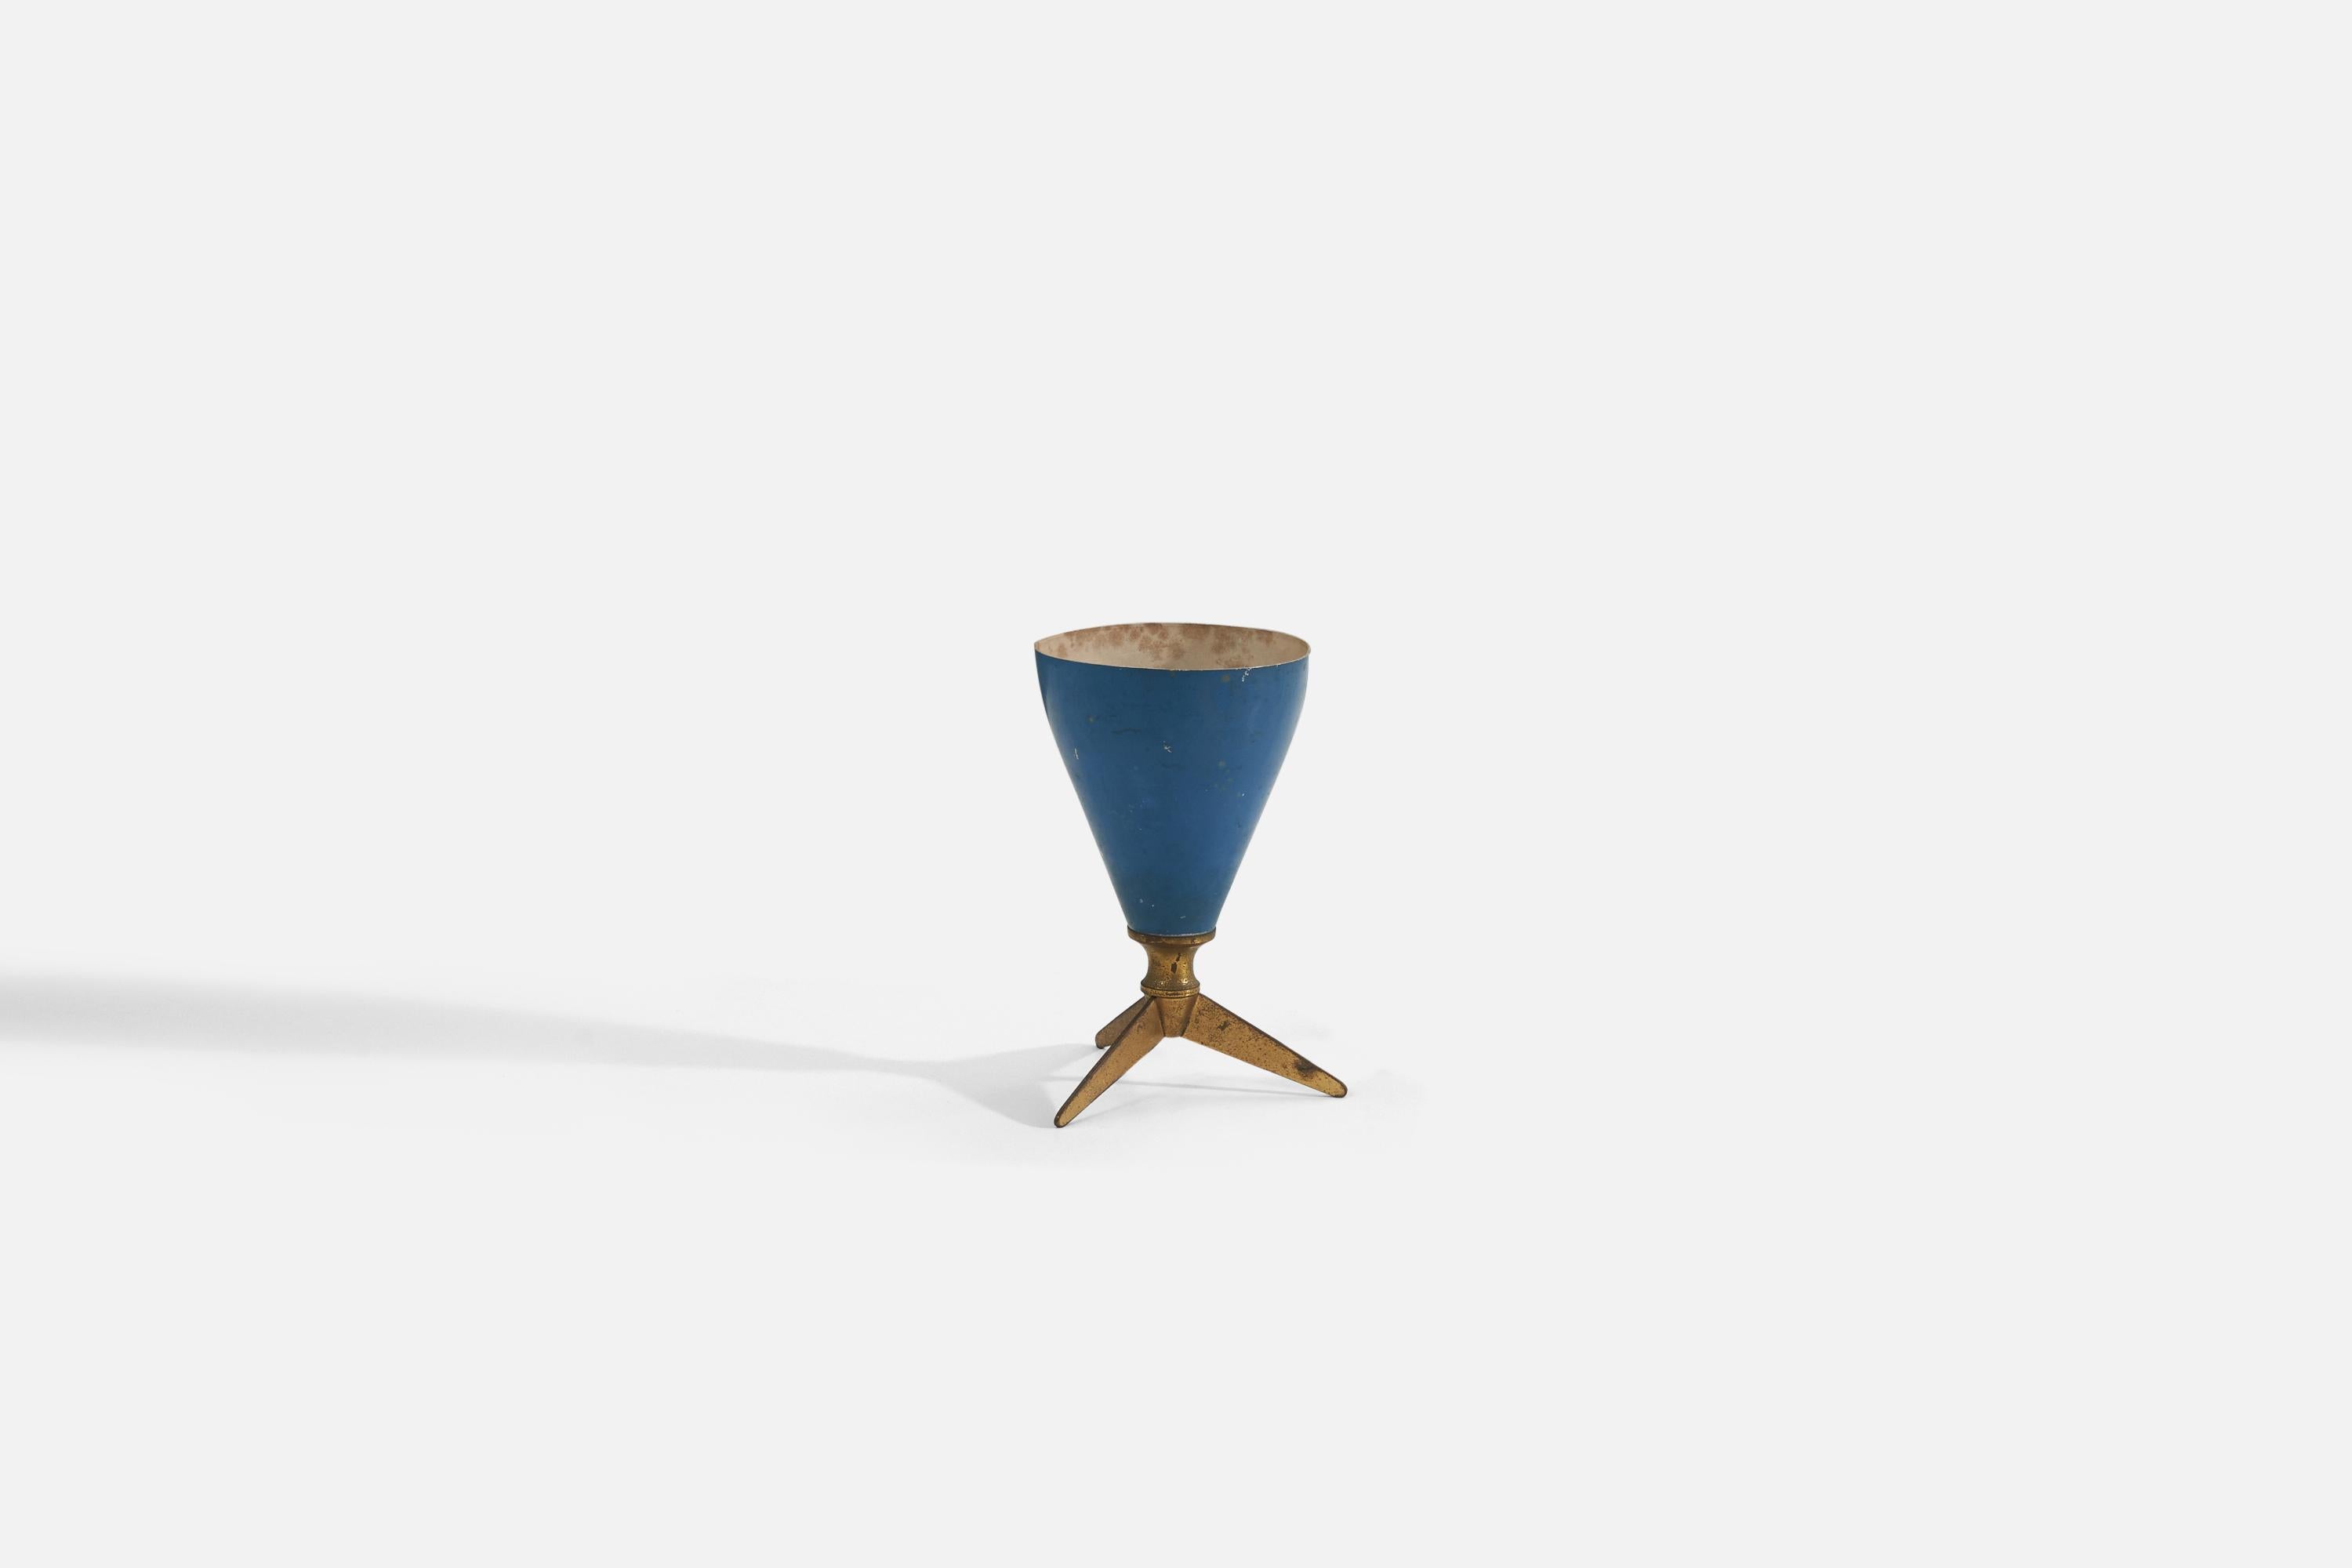 A table lamp designed and produced in Italy 1950s. The lamp features a brass base and a blue-lacquered metal shade.